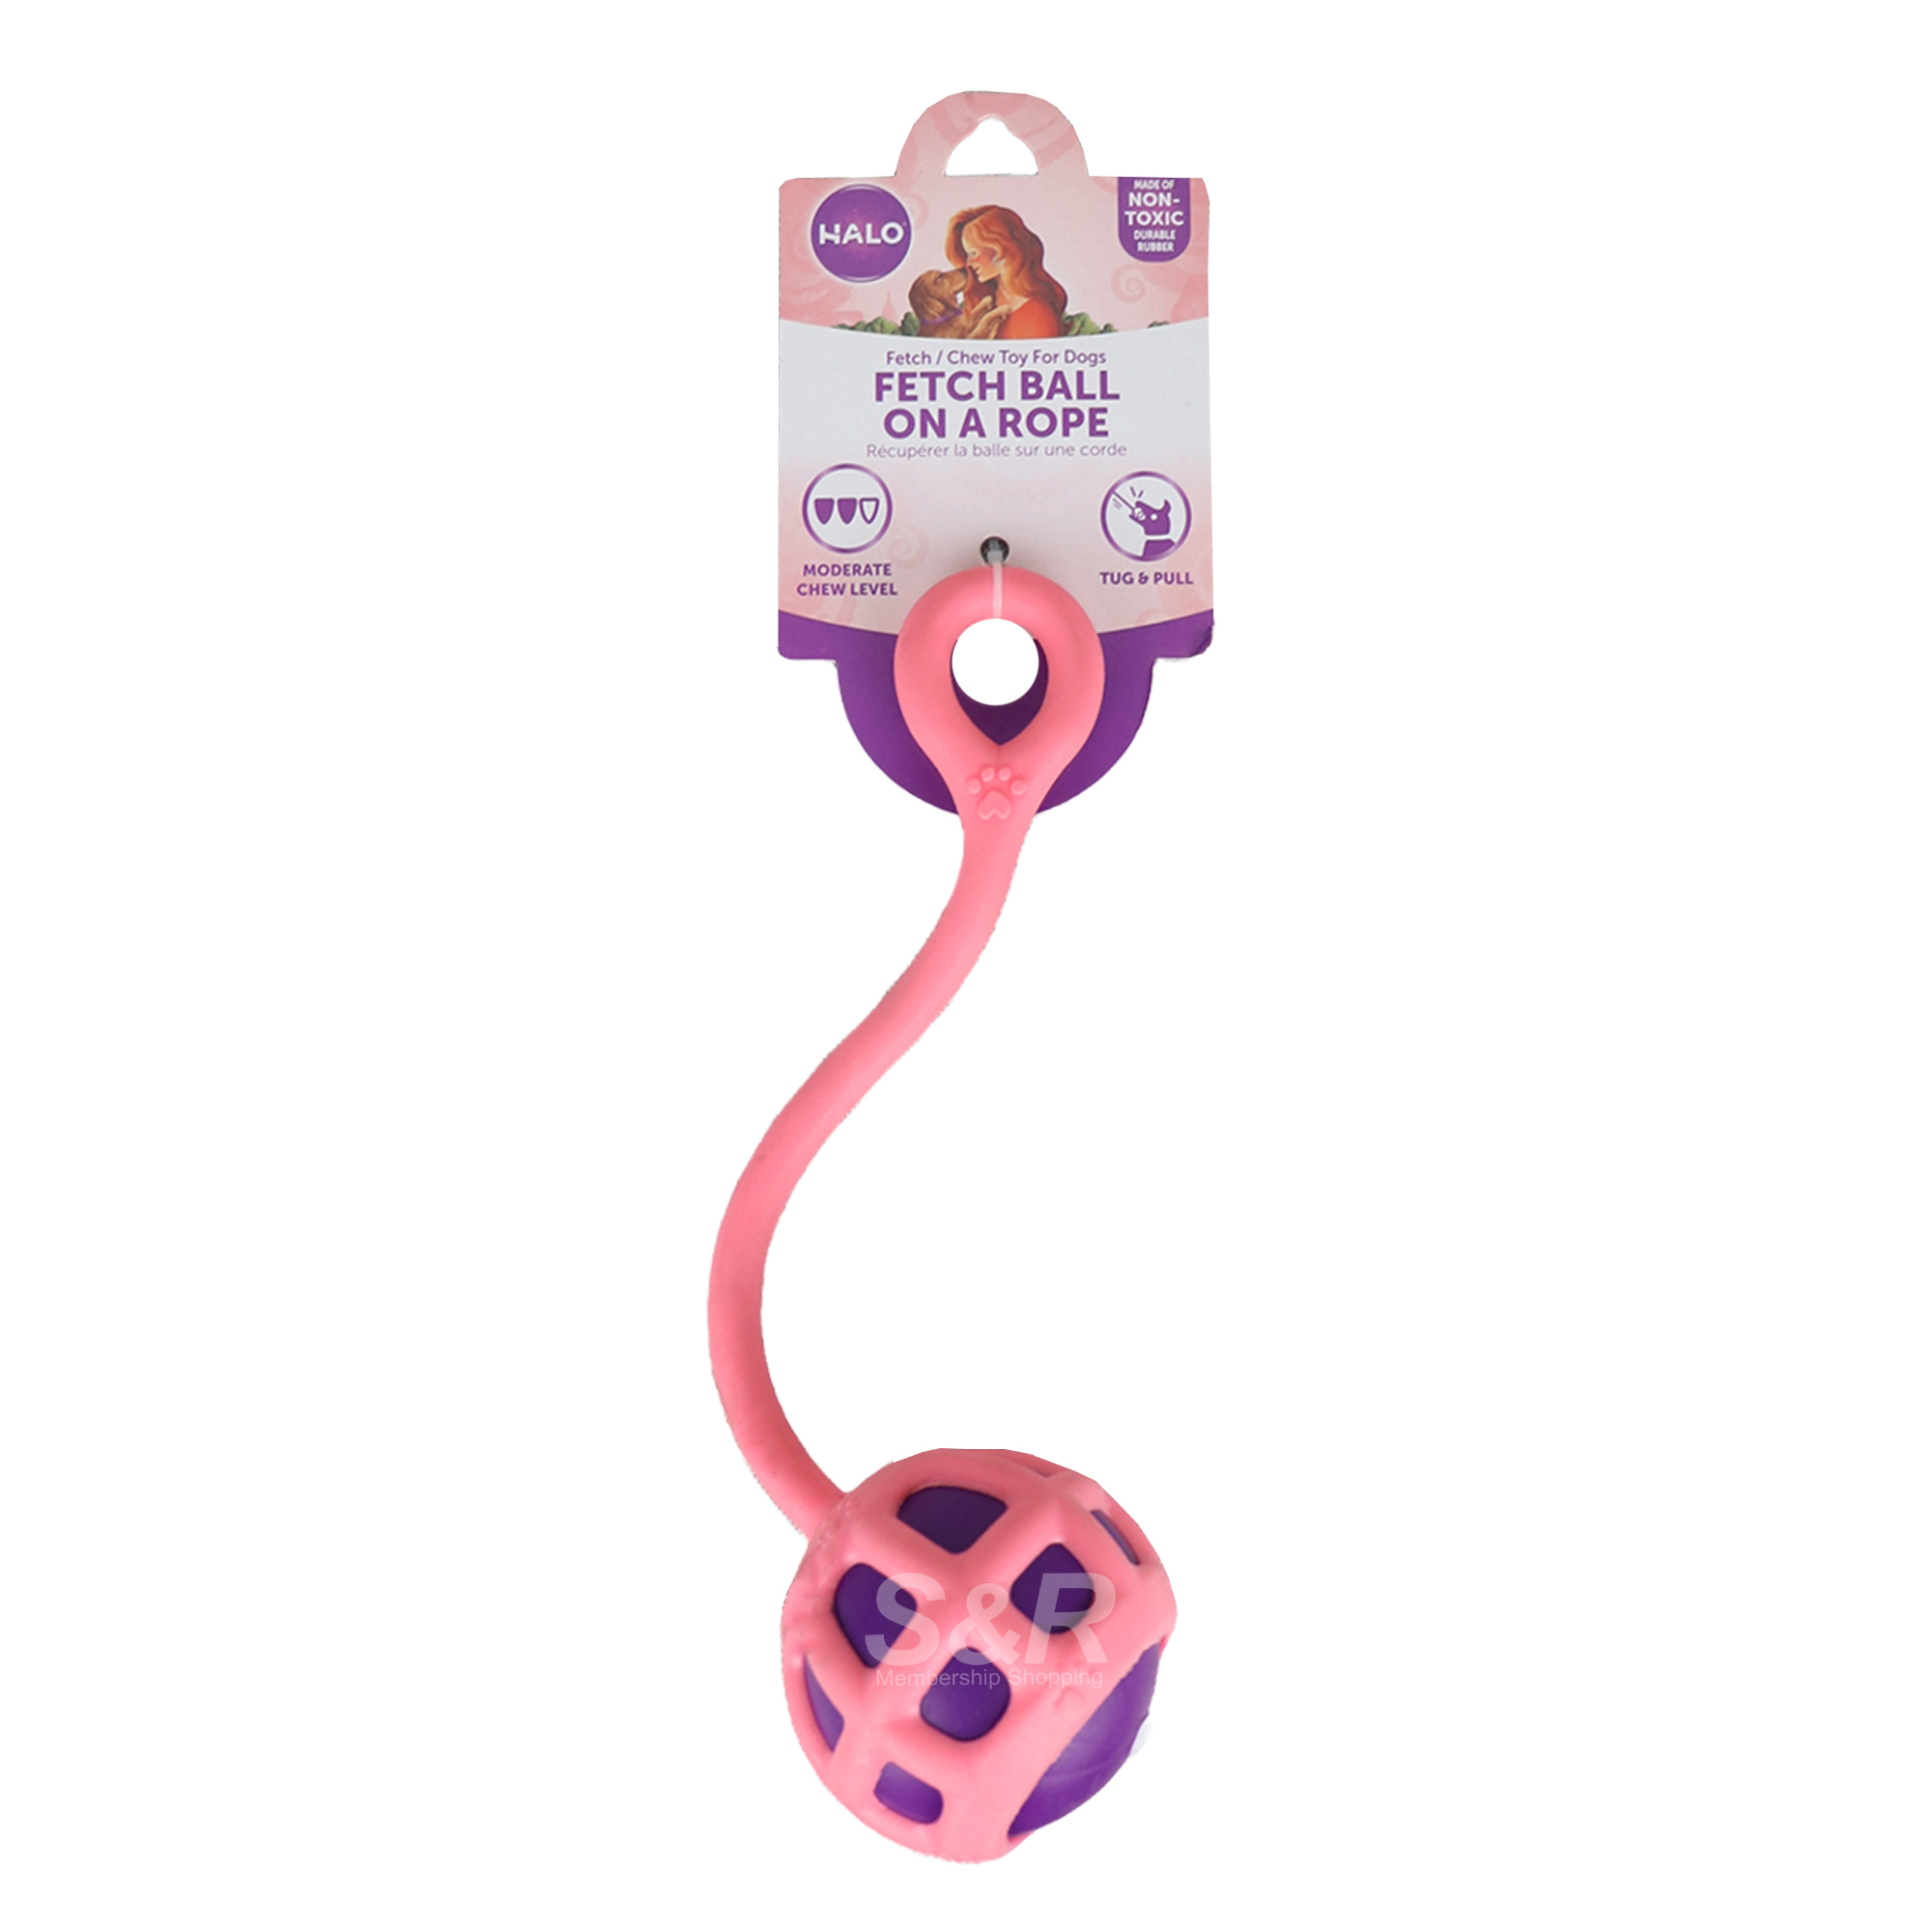 Halo Fetch/Chew Ball On A Rope Toy For Dogs